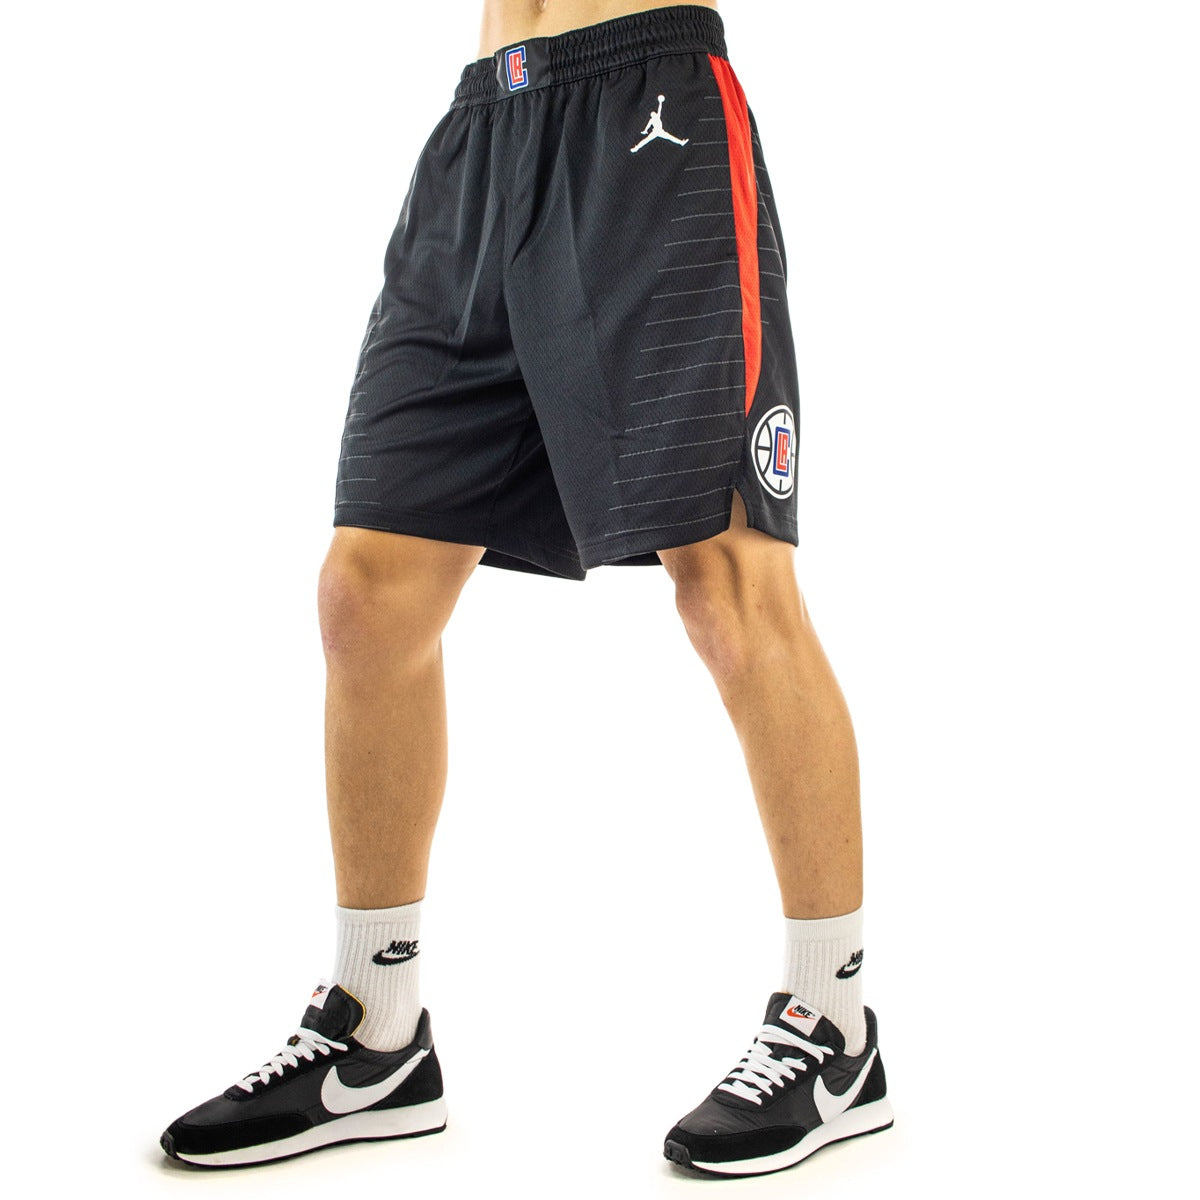 LA Clippers Statement Jerseys, Clippers Statement Edition Shorts